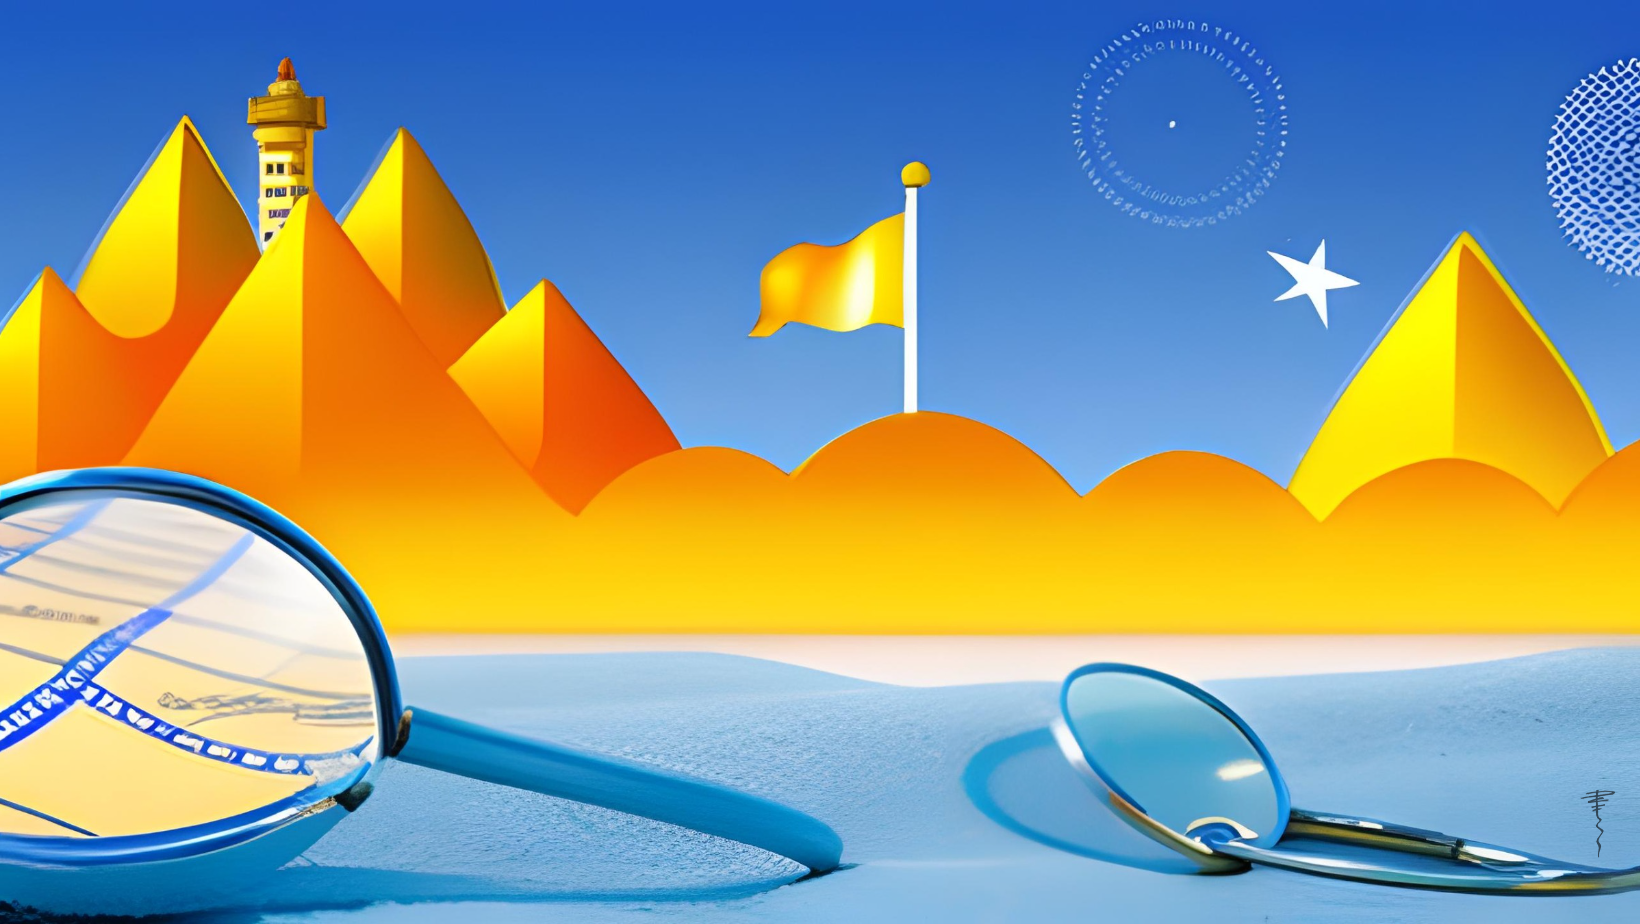 Treasure map illustrating SEO concepts with a sandcastle symbolizing quality content, magnifying glass for keyword research, and bridges as internal and external links on a blue gradient background.